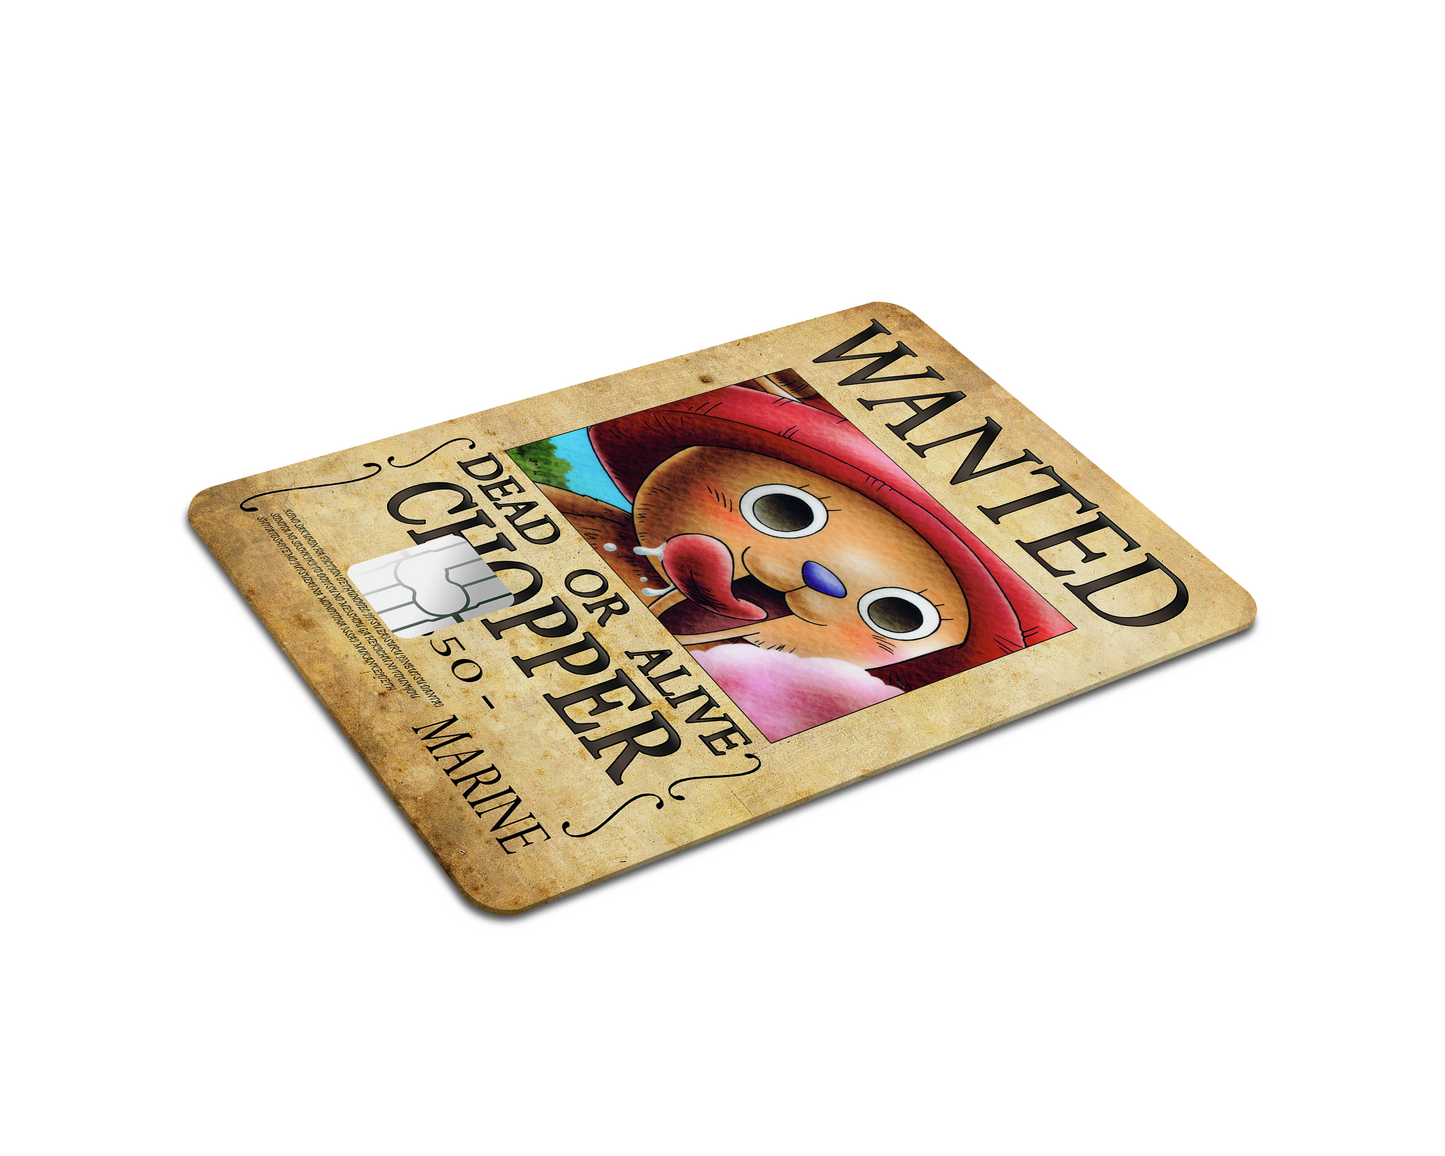 Anime Town Creations Credit Card One Piece Chopper Wanted Poster Full Skins - Anime One Piece Skin